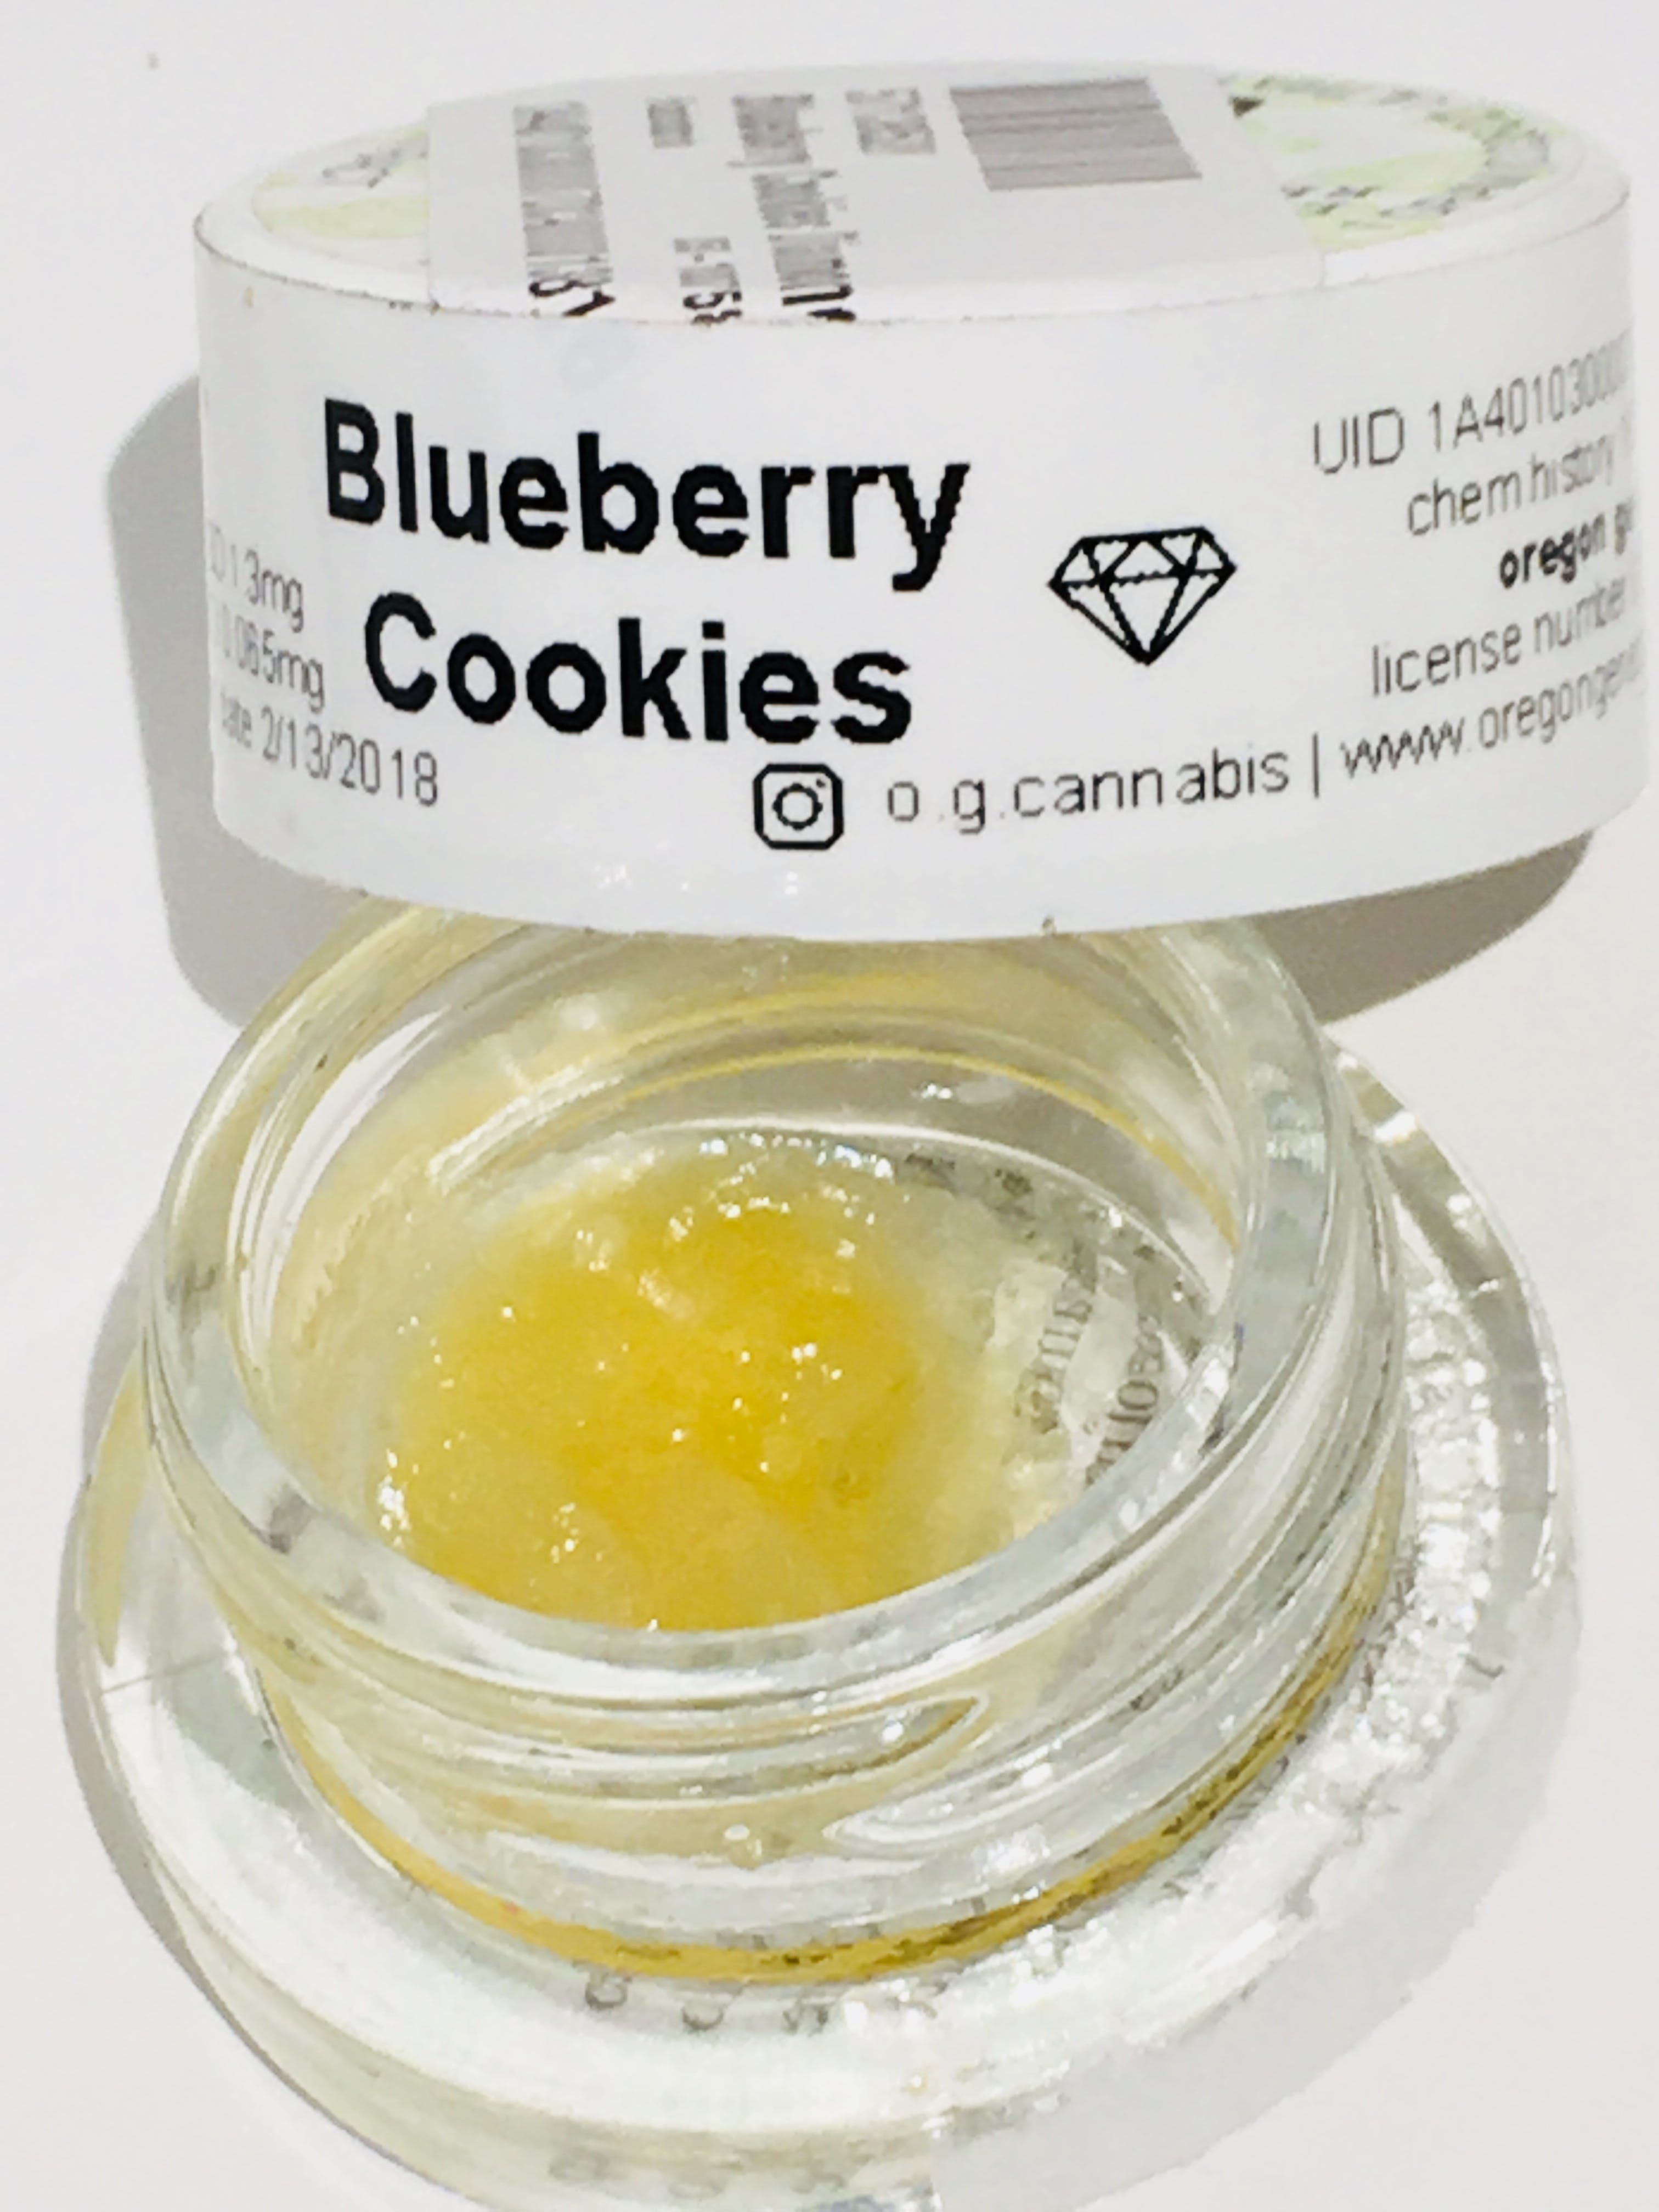 wax-blueberry-cookies-live-resin-by-oregon-genetics